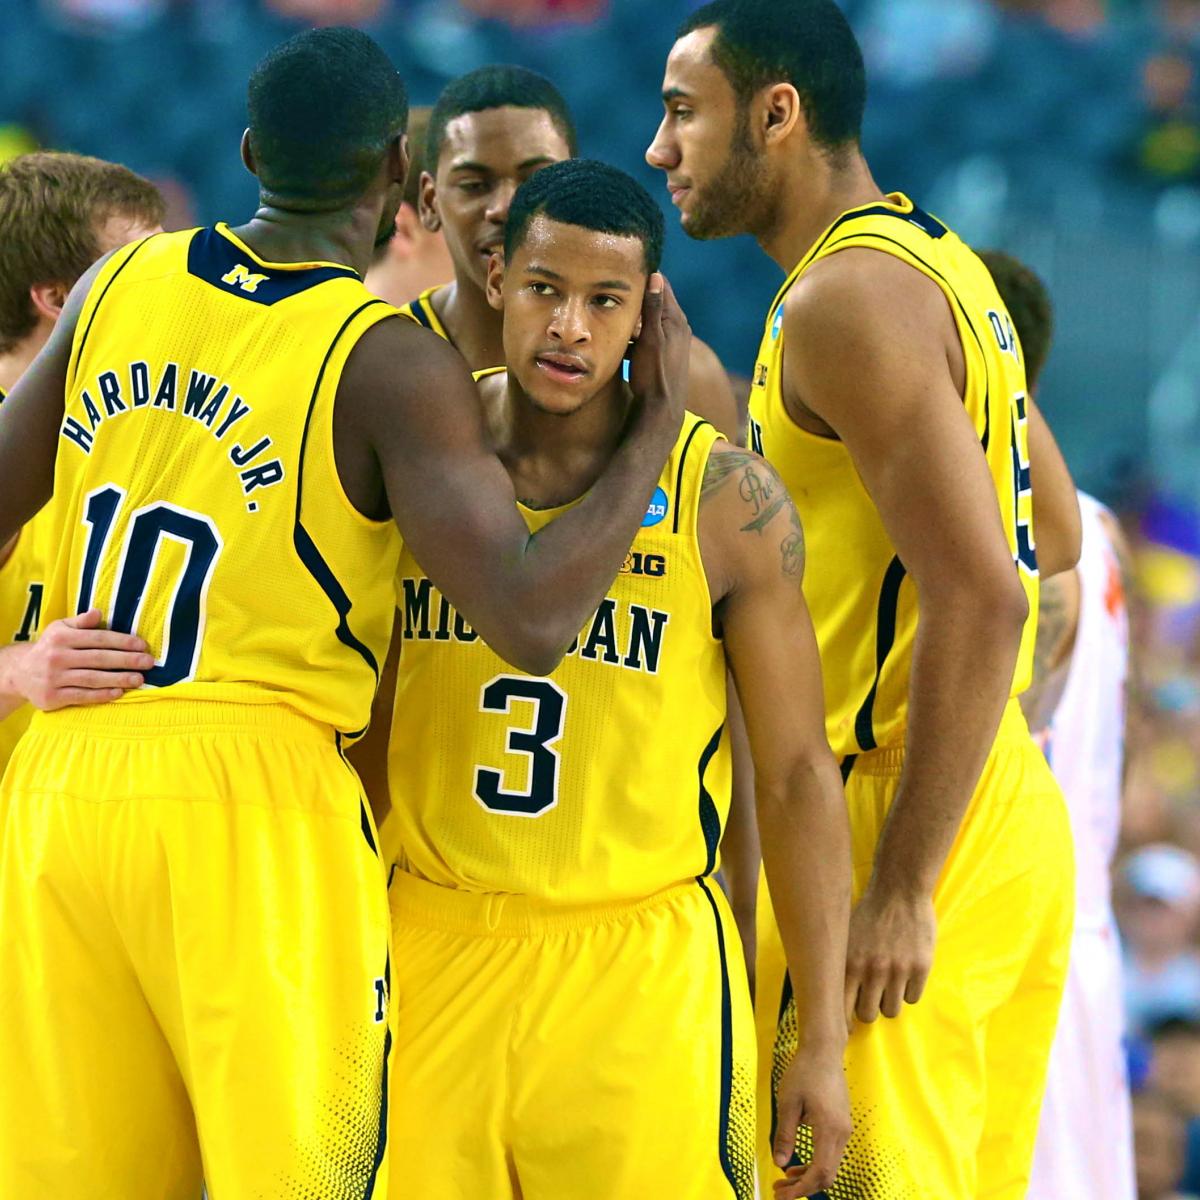 Trey Burke's decision to stay put inspires, bolsters Michigan teammates